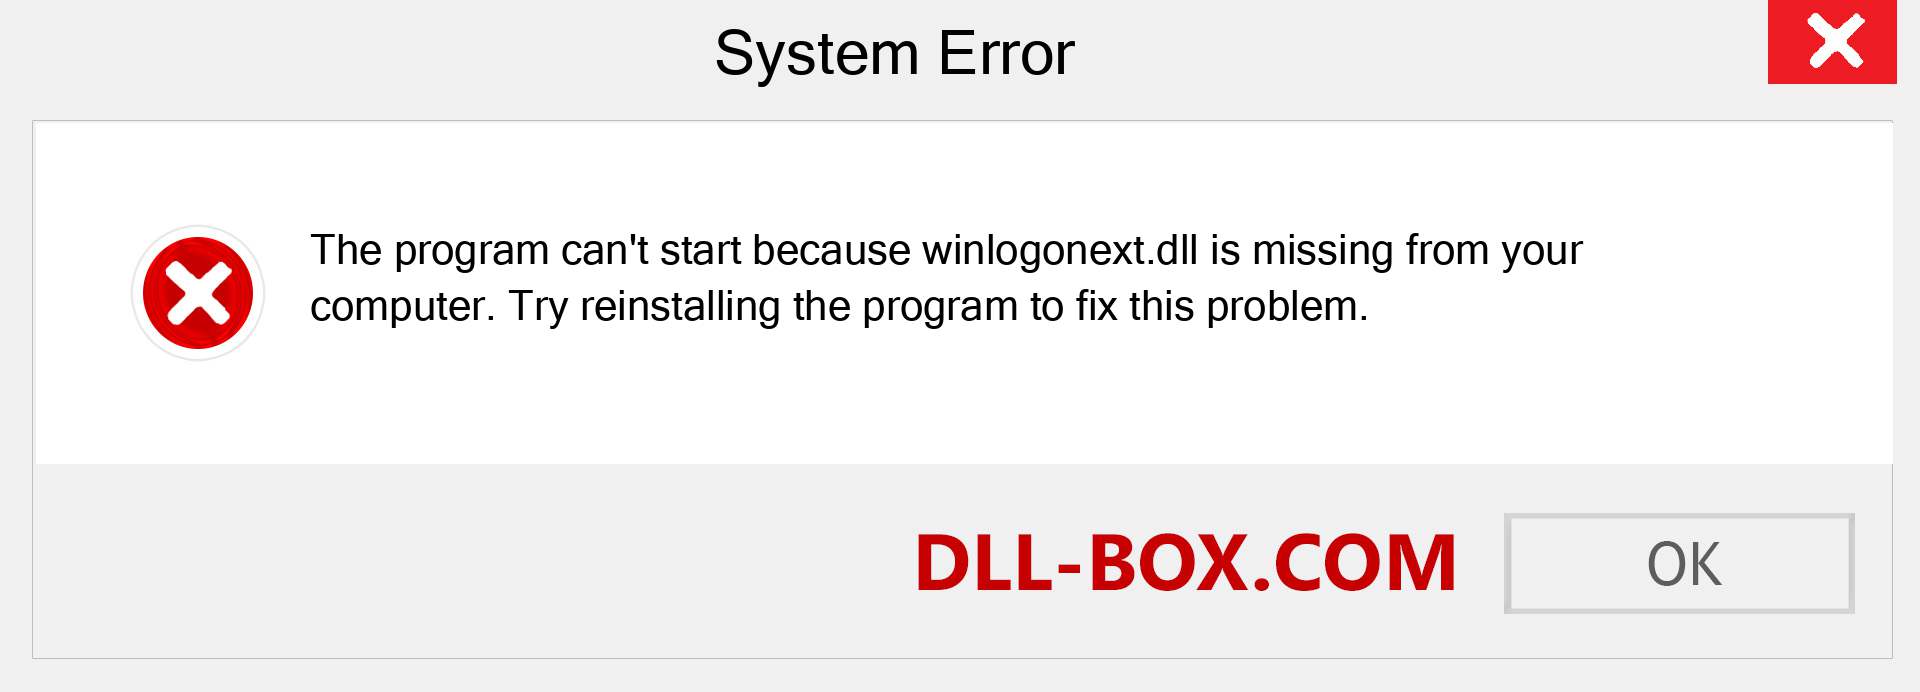  winlogonext.dll file is missing?. Download for Windows 7, 8, 10 - Fix  winlogonext dll Missing Error on Windows, photos, images